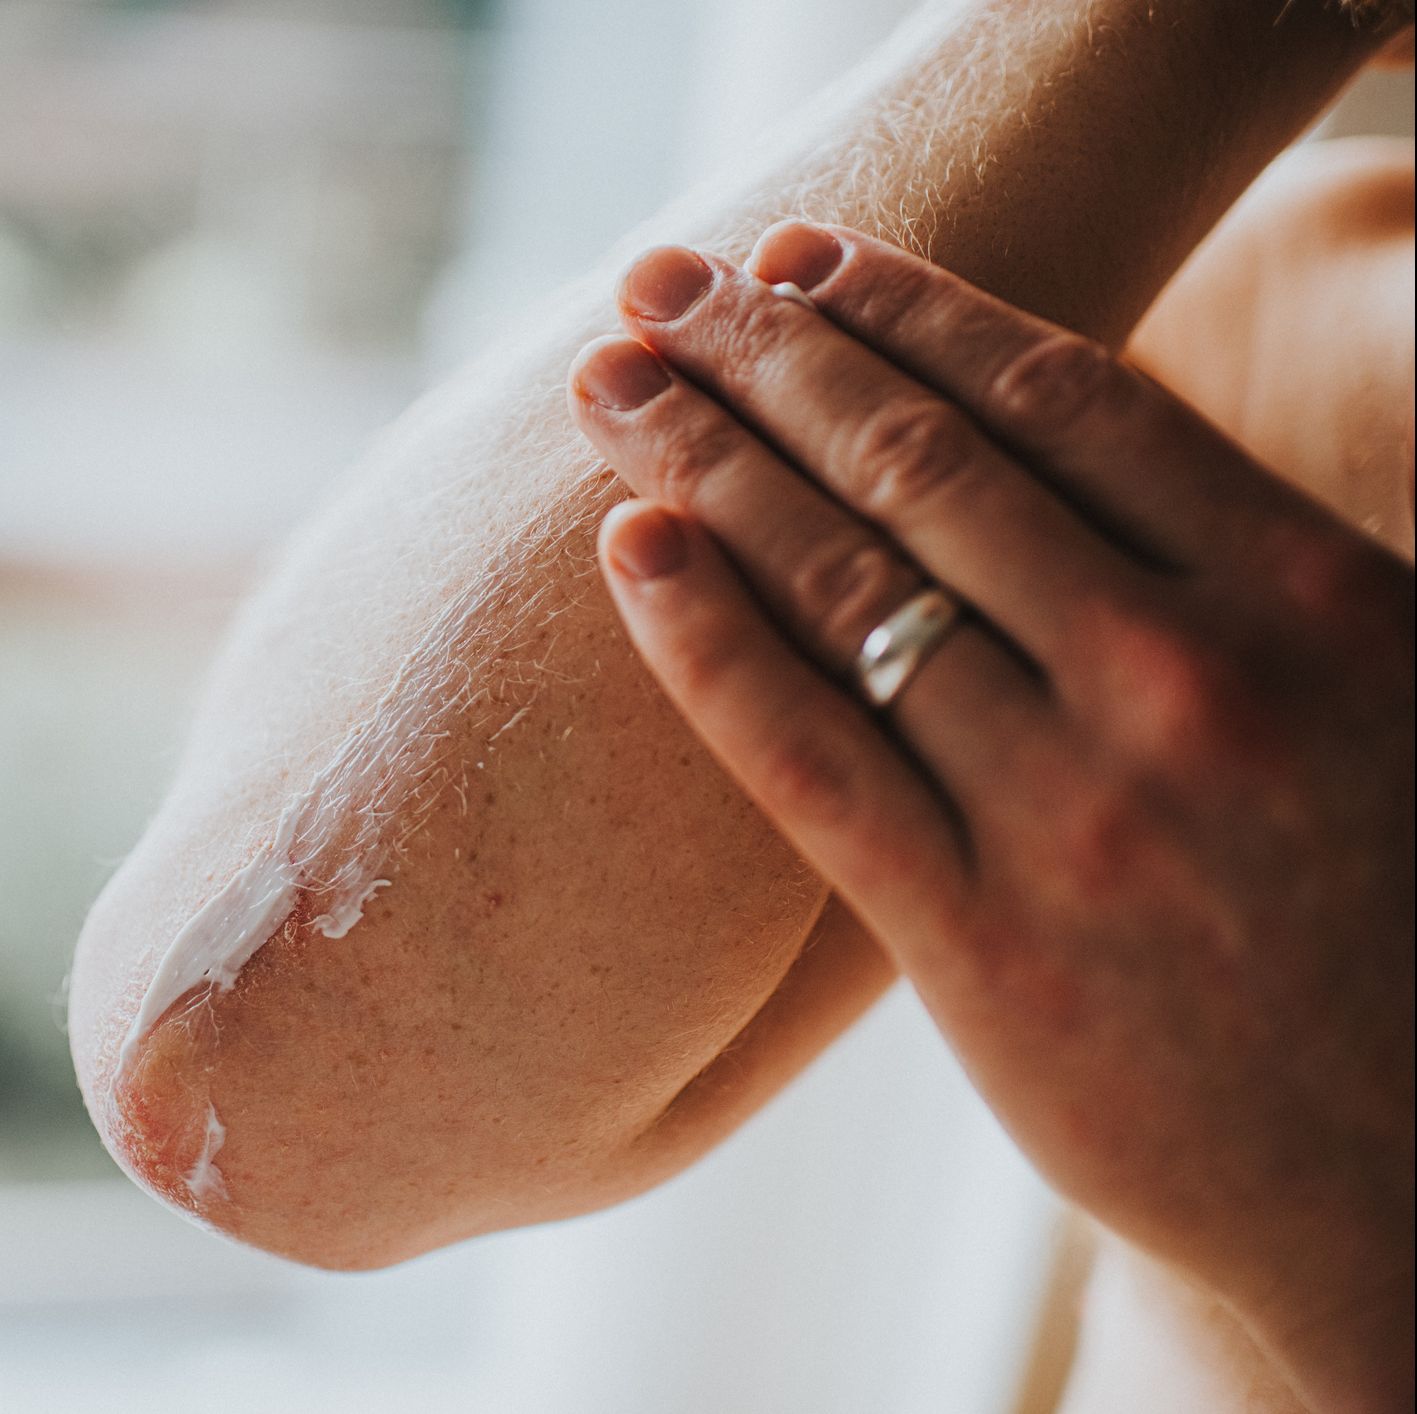 5 Signs You Might Be Suffering From More Than Just Dry Skin